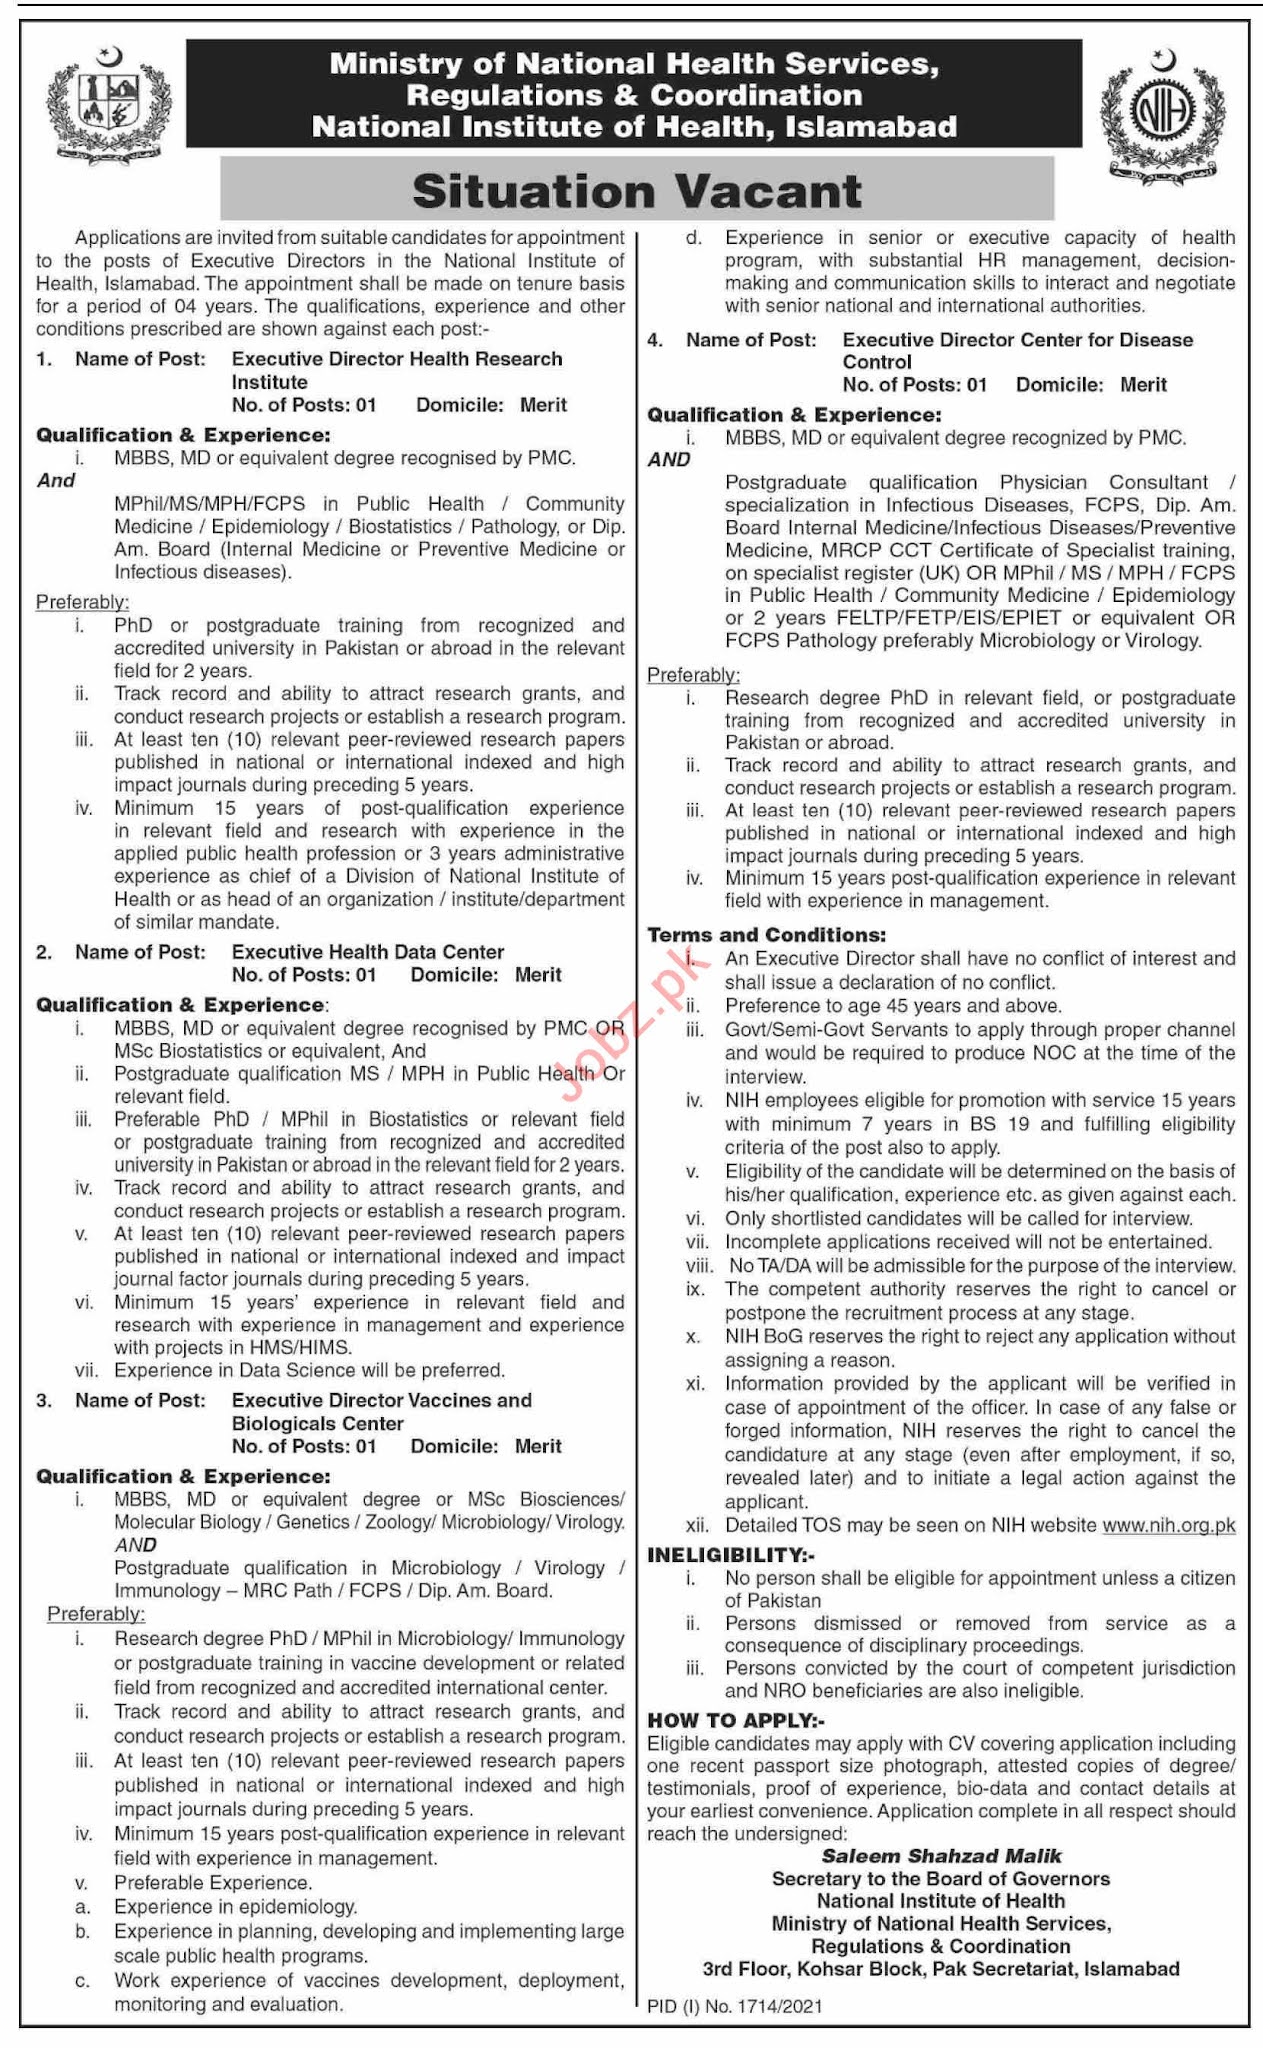 Jobs in Ministry of National Health Services Regulations & Coordination